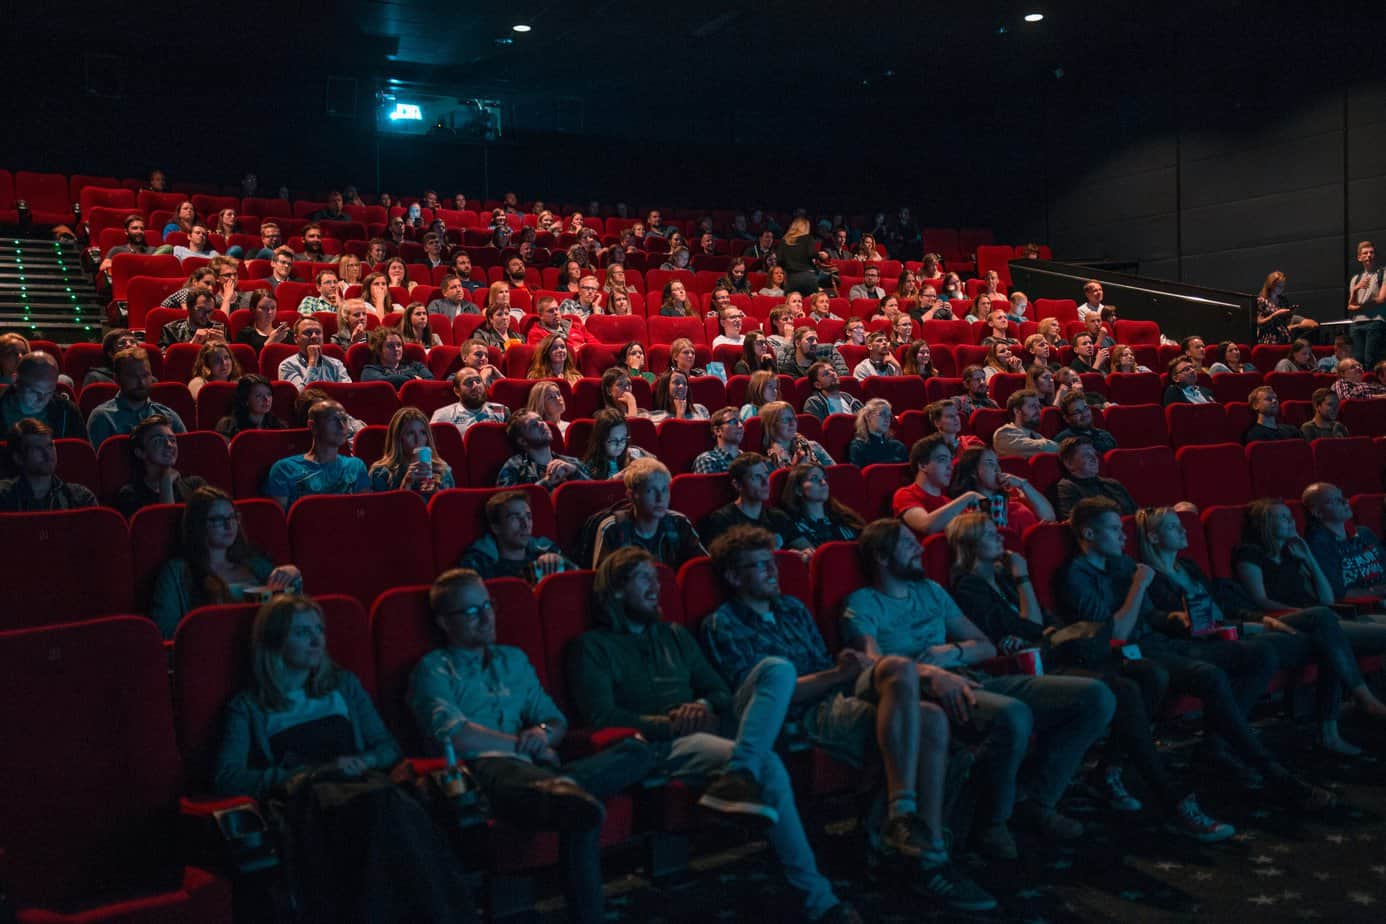 A group of people in a movie theater look up at the big screen